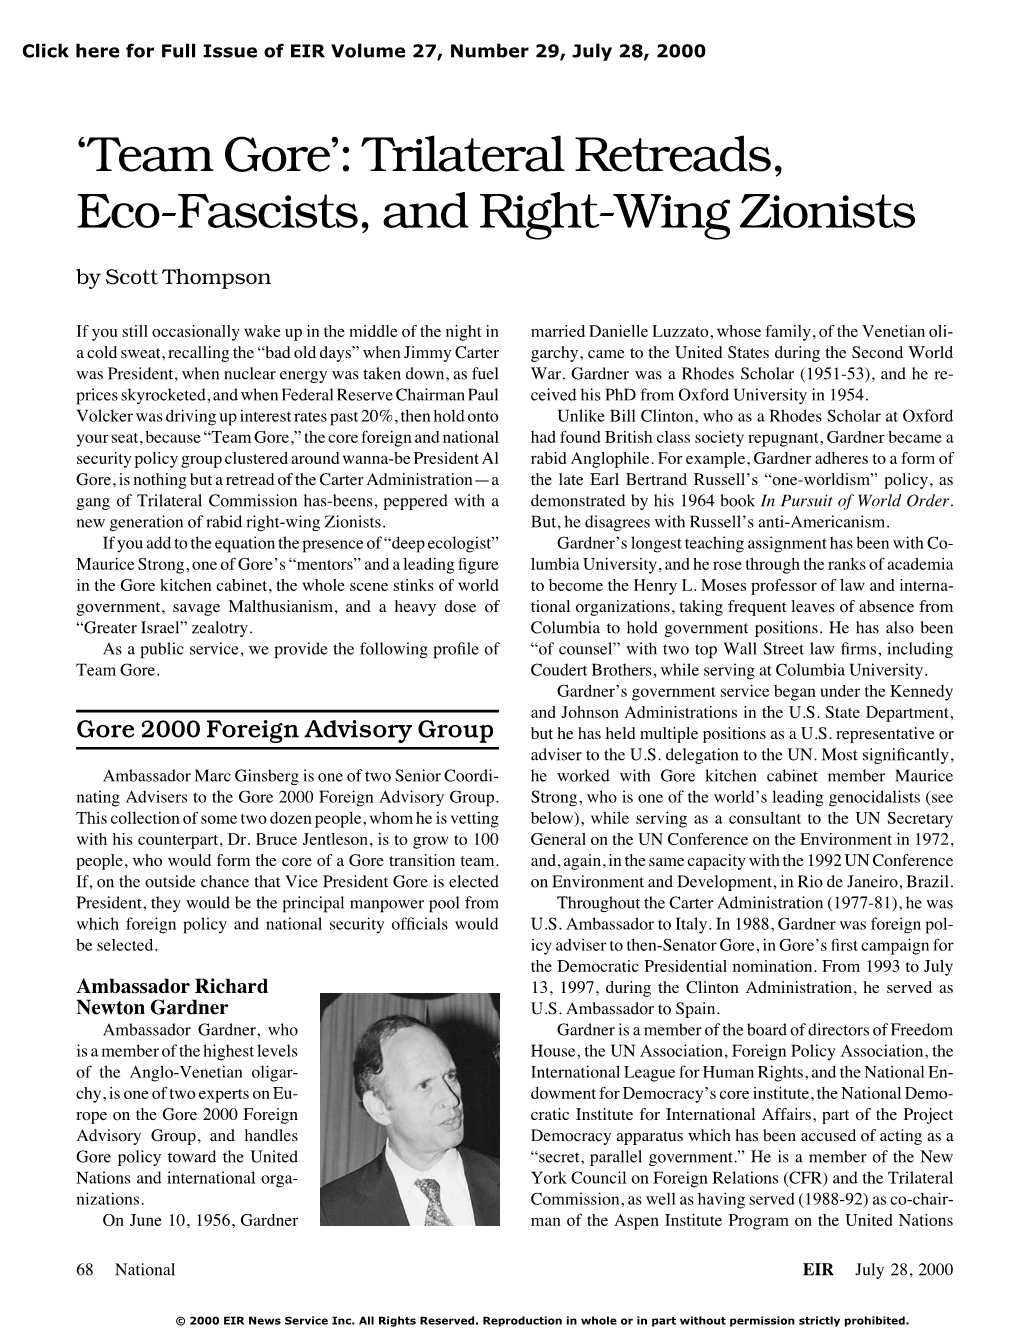 Team Gore’: Trilateral Retreads, Eco-Fascists, and Right-Wing Zionists